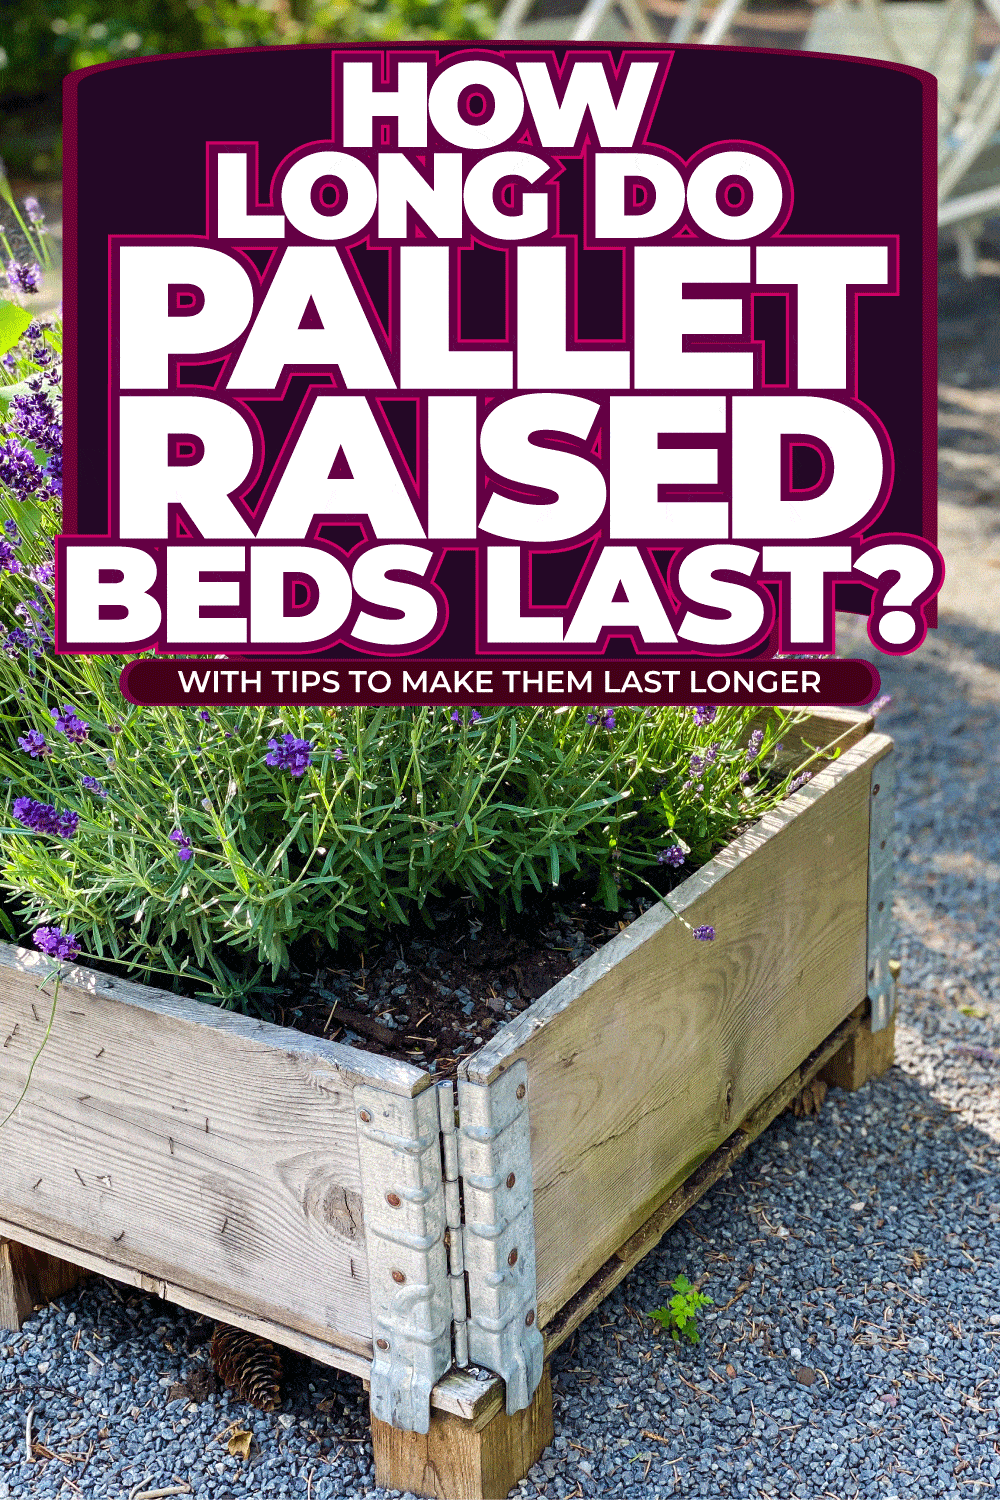 How Long Do Pallet Raised Beds Last? [With Tips To Make Them Last Longer!]